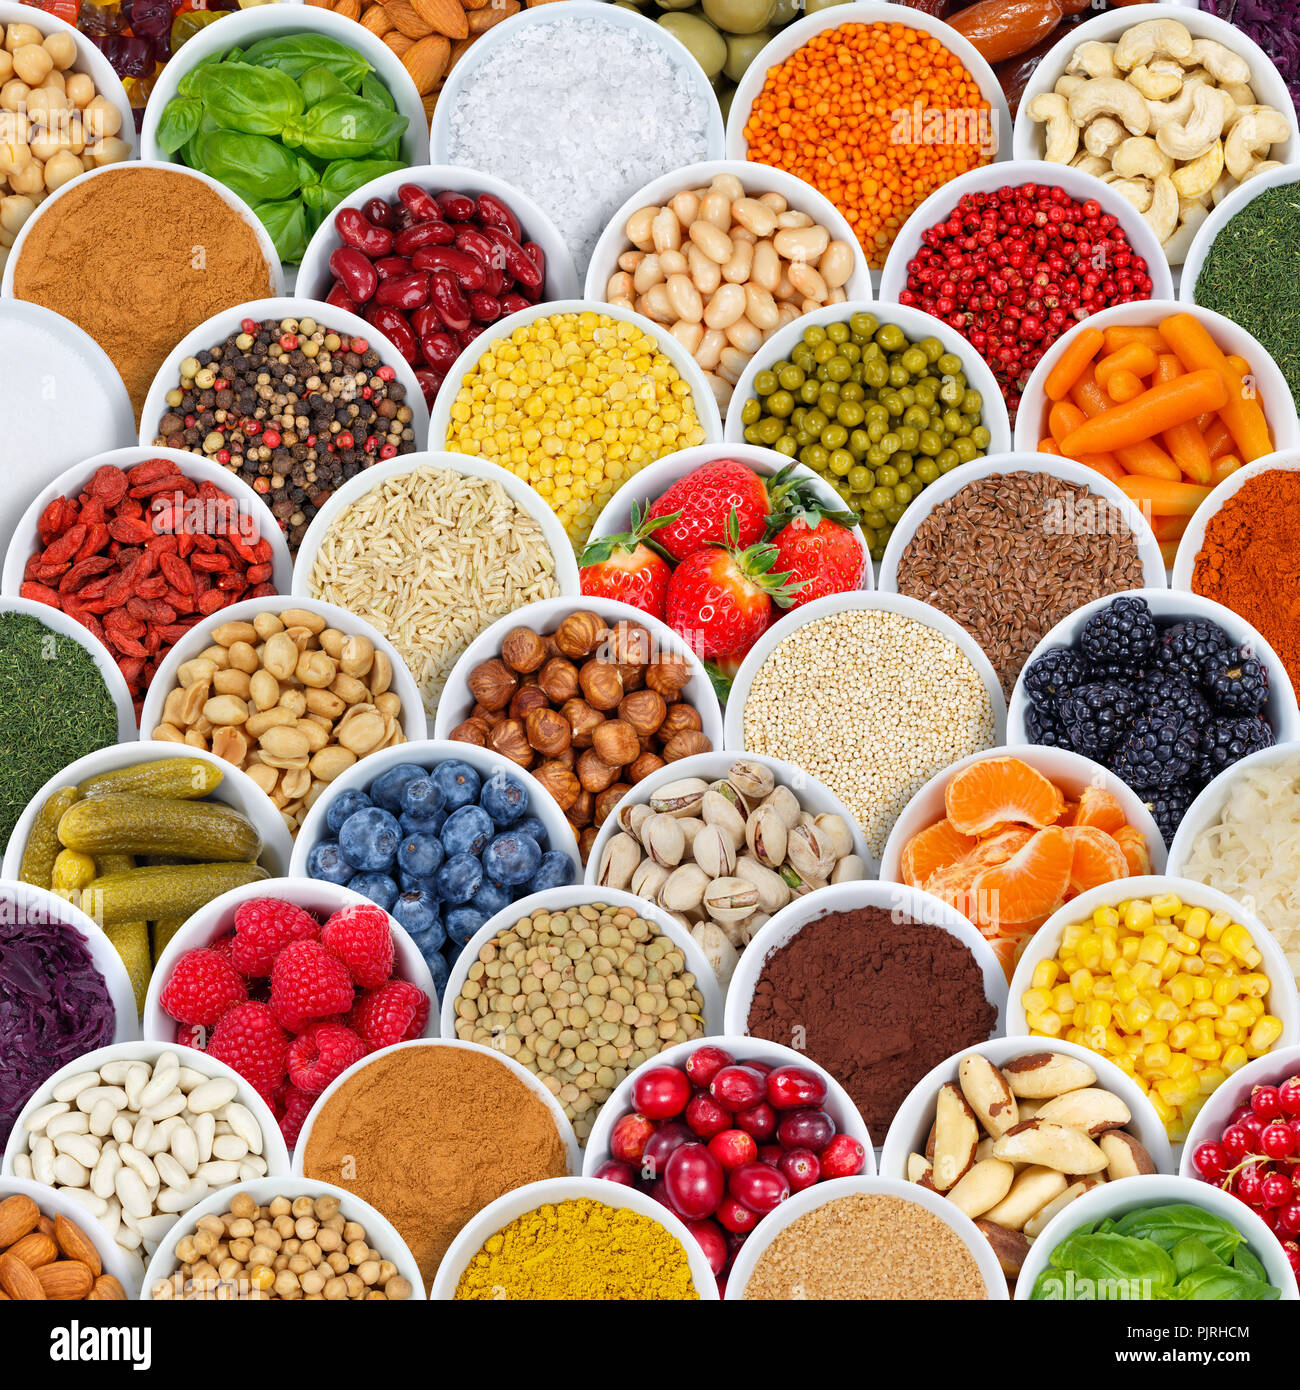 Fruits and vegetables spices ingredients background square berries from above fruit Stock Photo